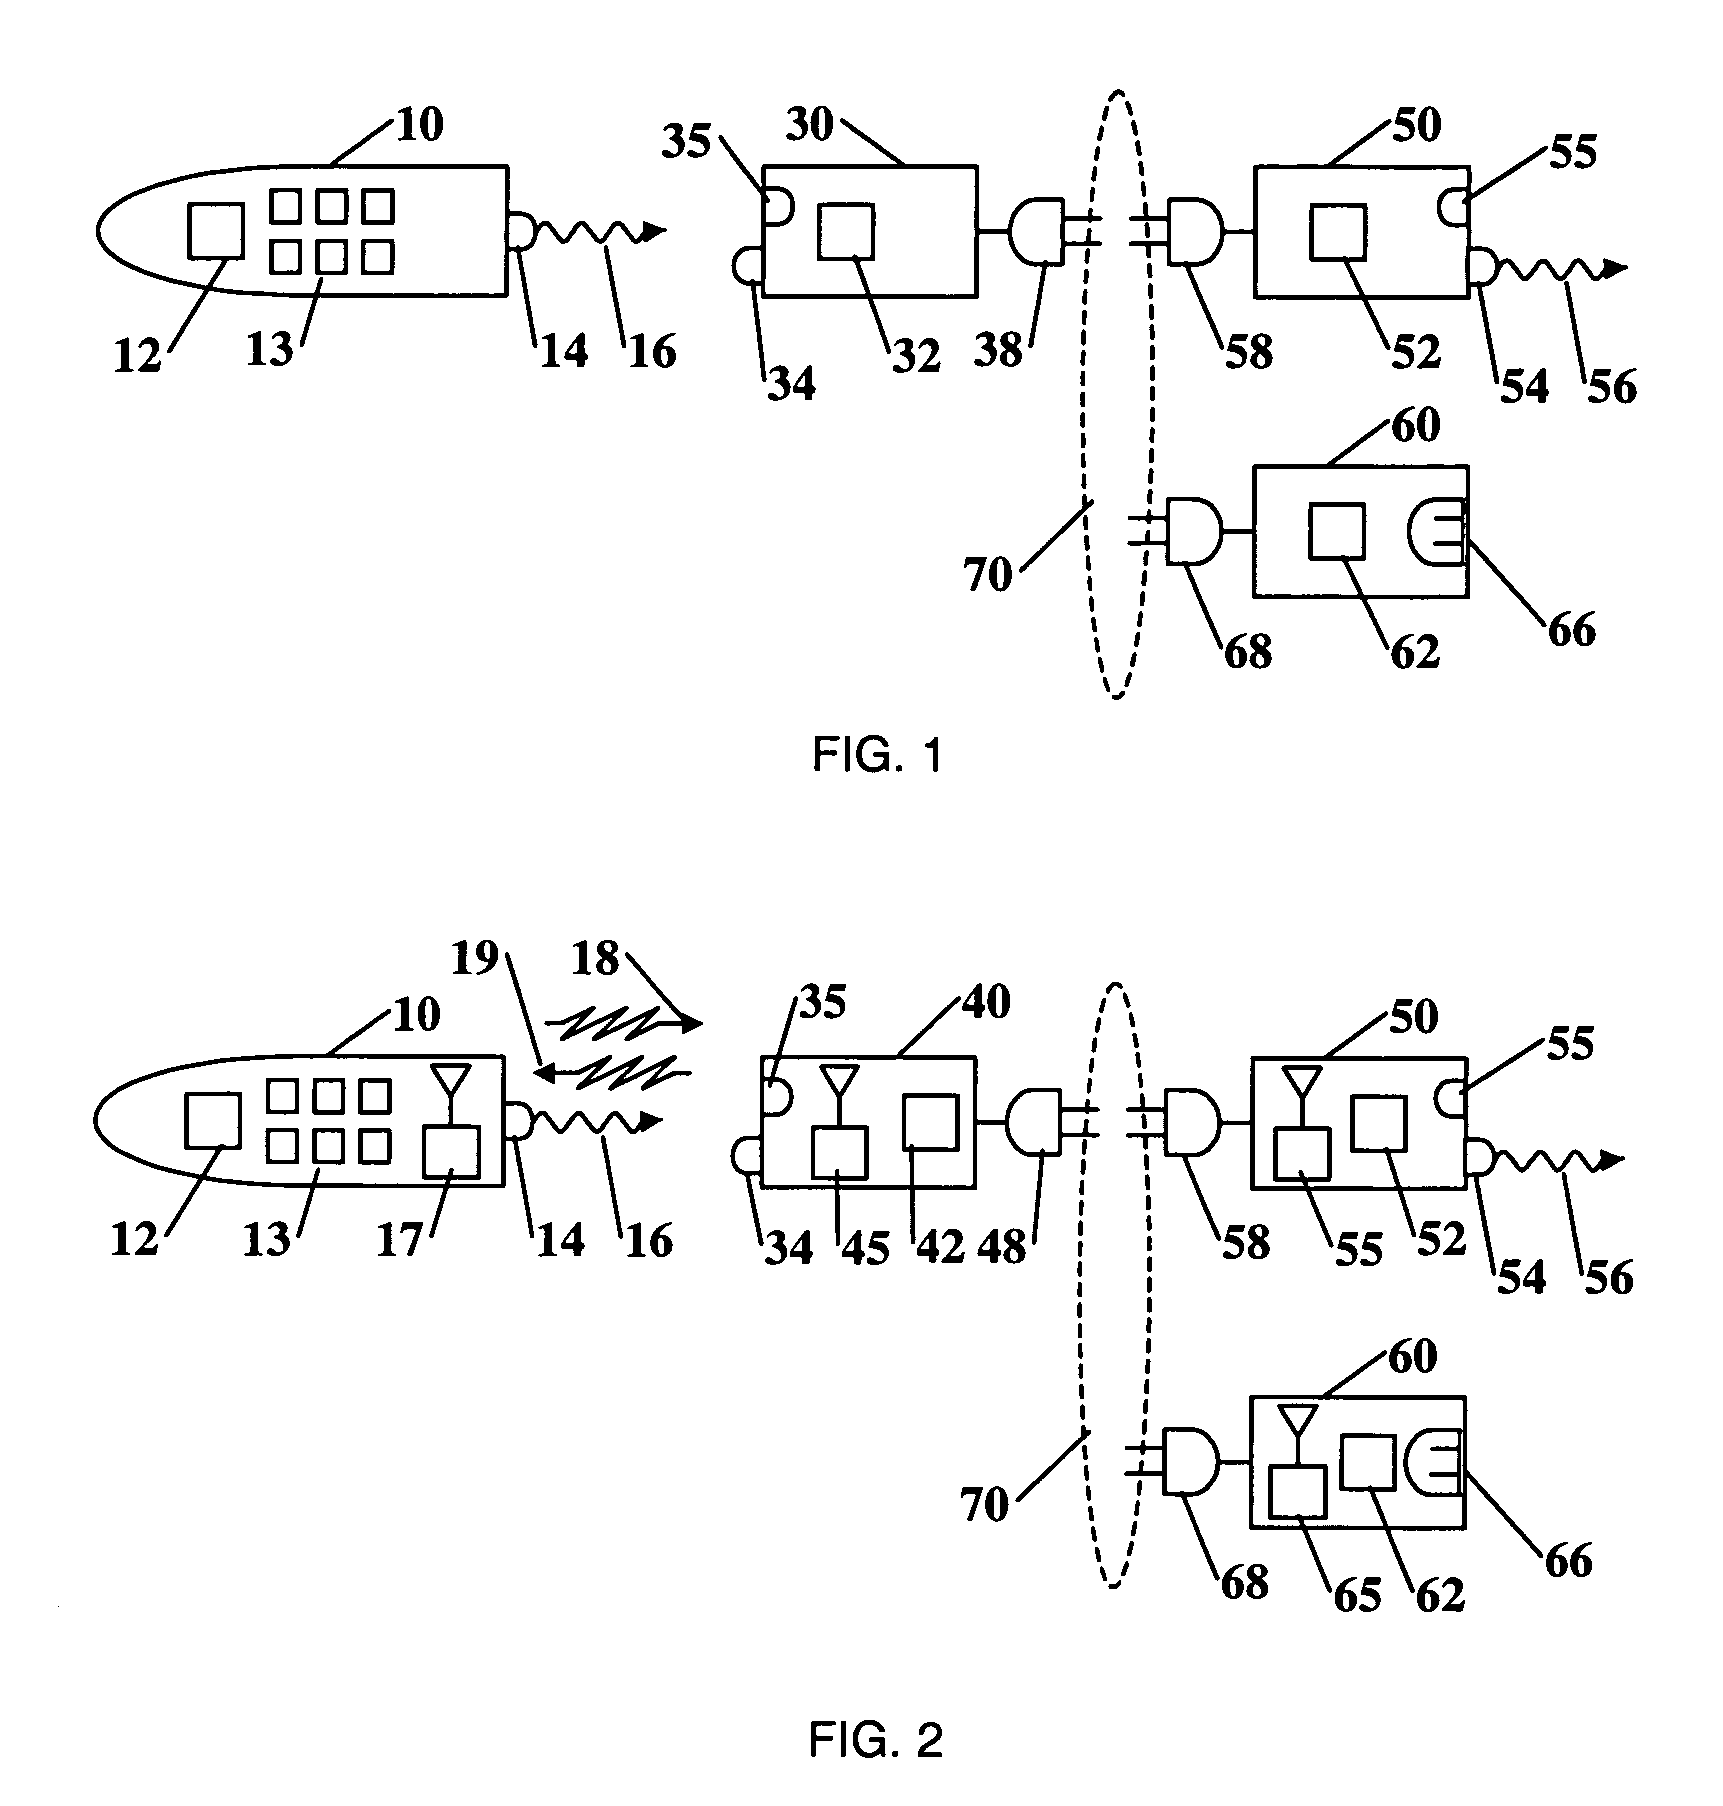 Remote operation of local or distant infrared-controllable and non-infrared-controllable devices